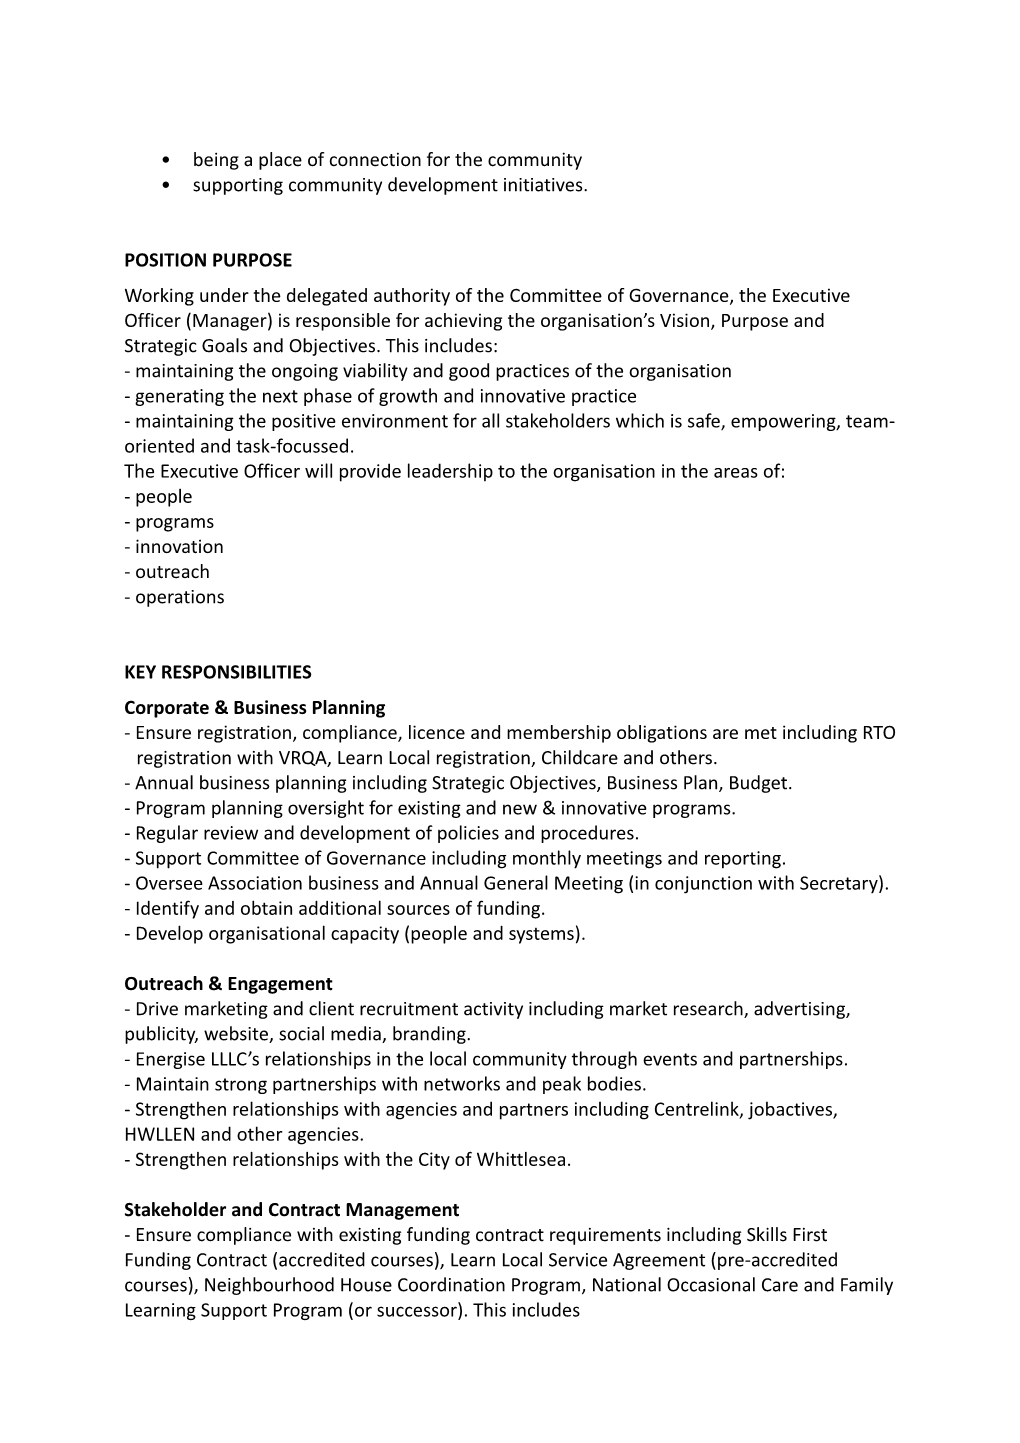 Executive Officer (Manager) - Role Summary